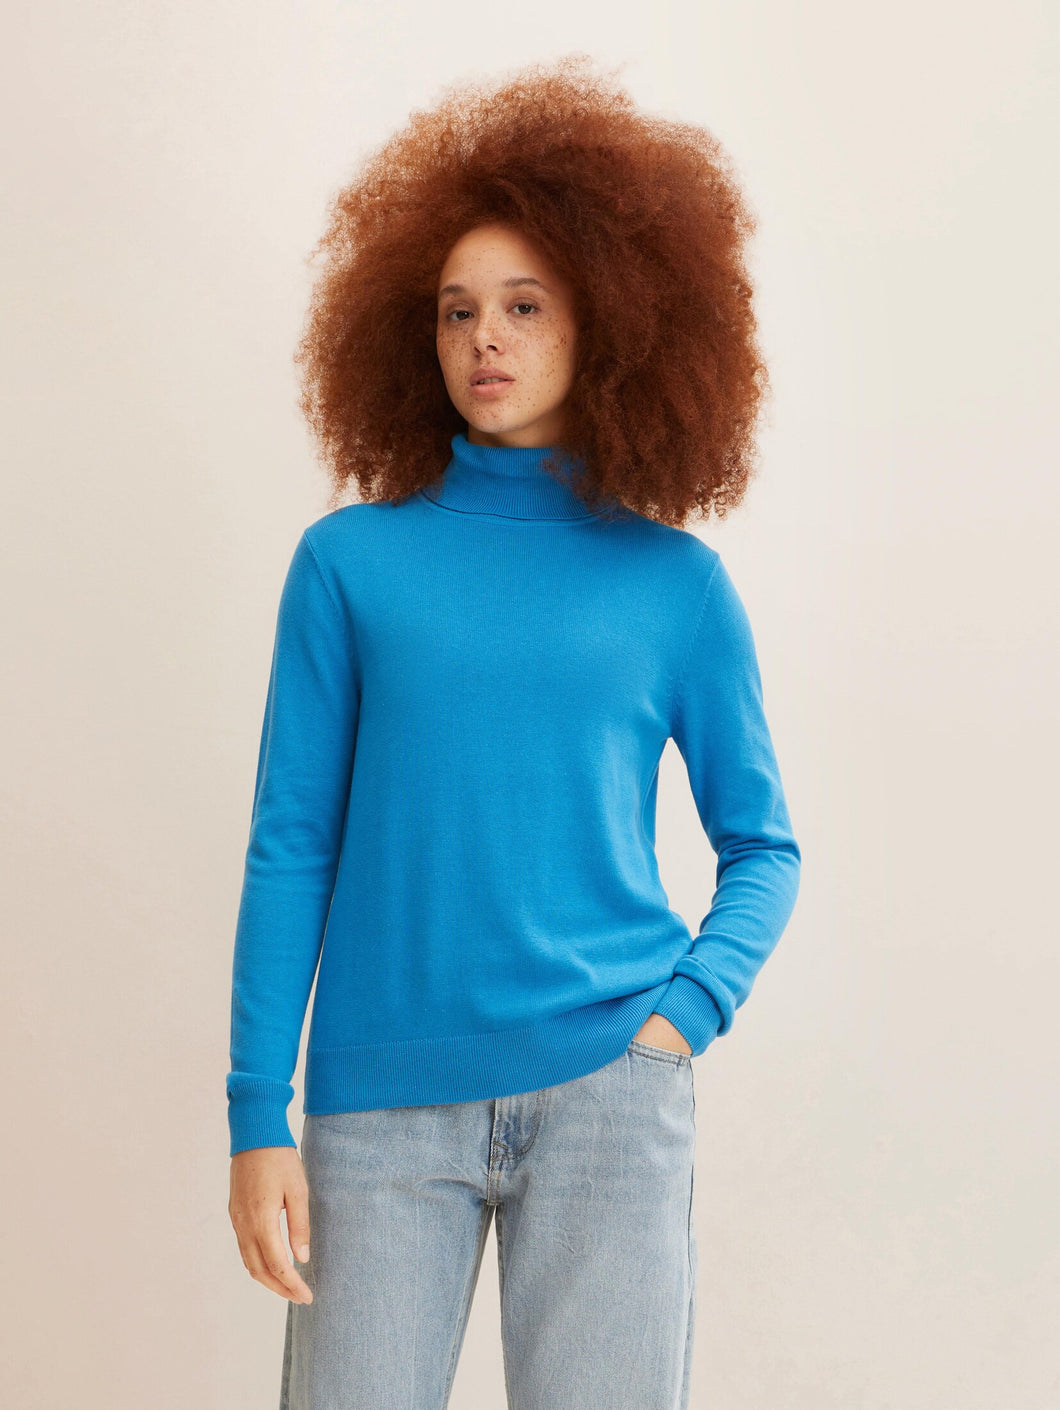 Tom Tailor Basic Knit Turtleneck Sweater in Sublime Teal Blue or Smooth Papaya Red